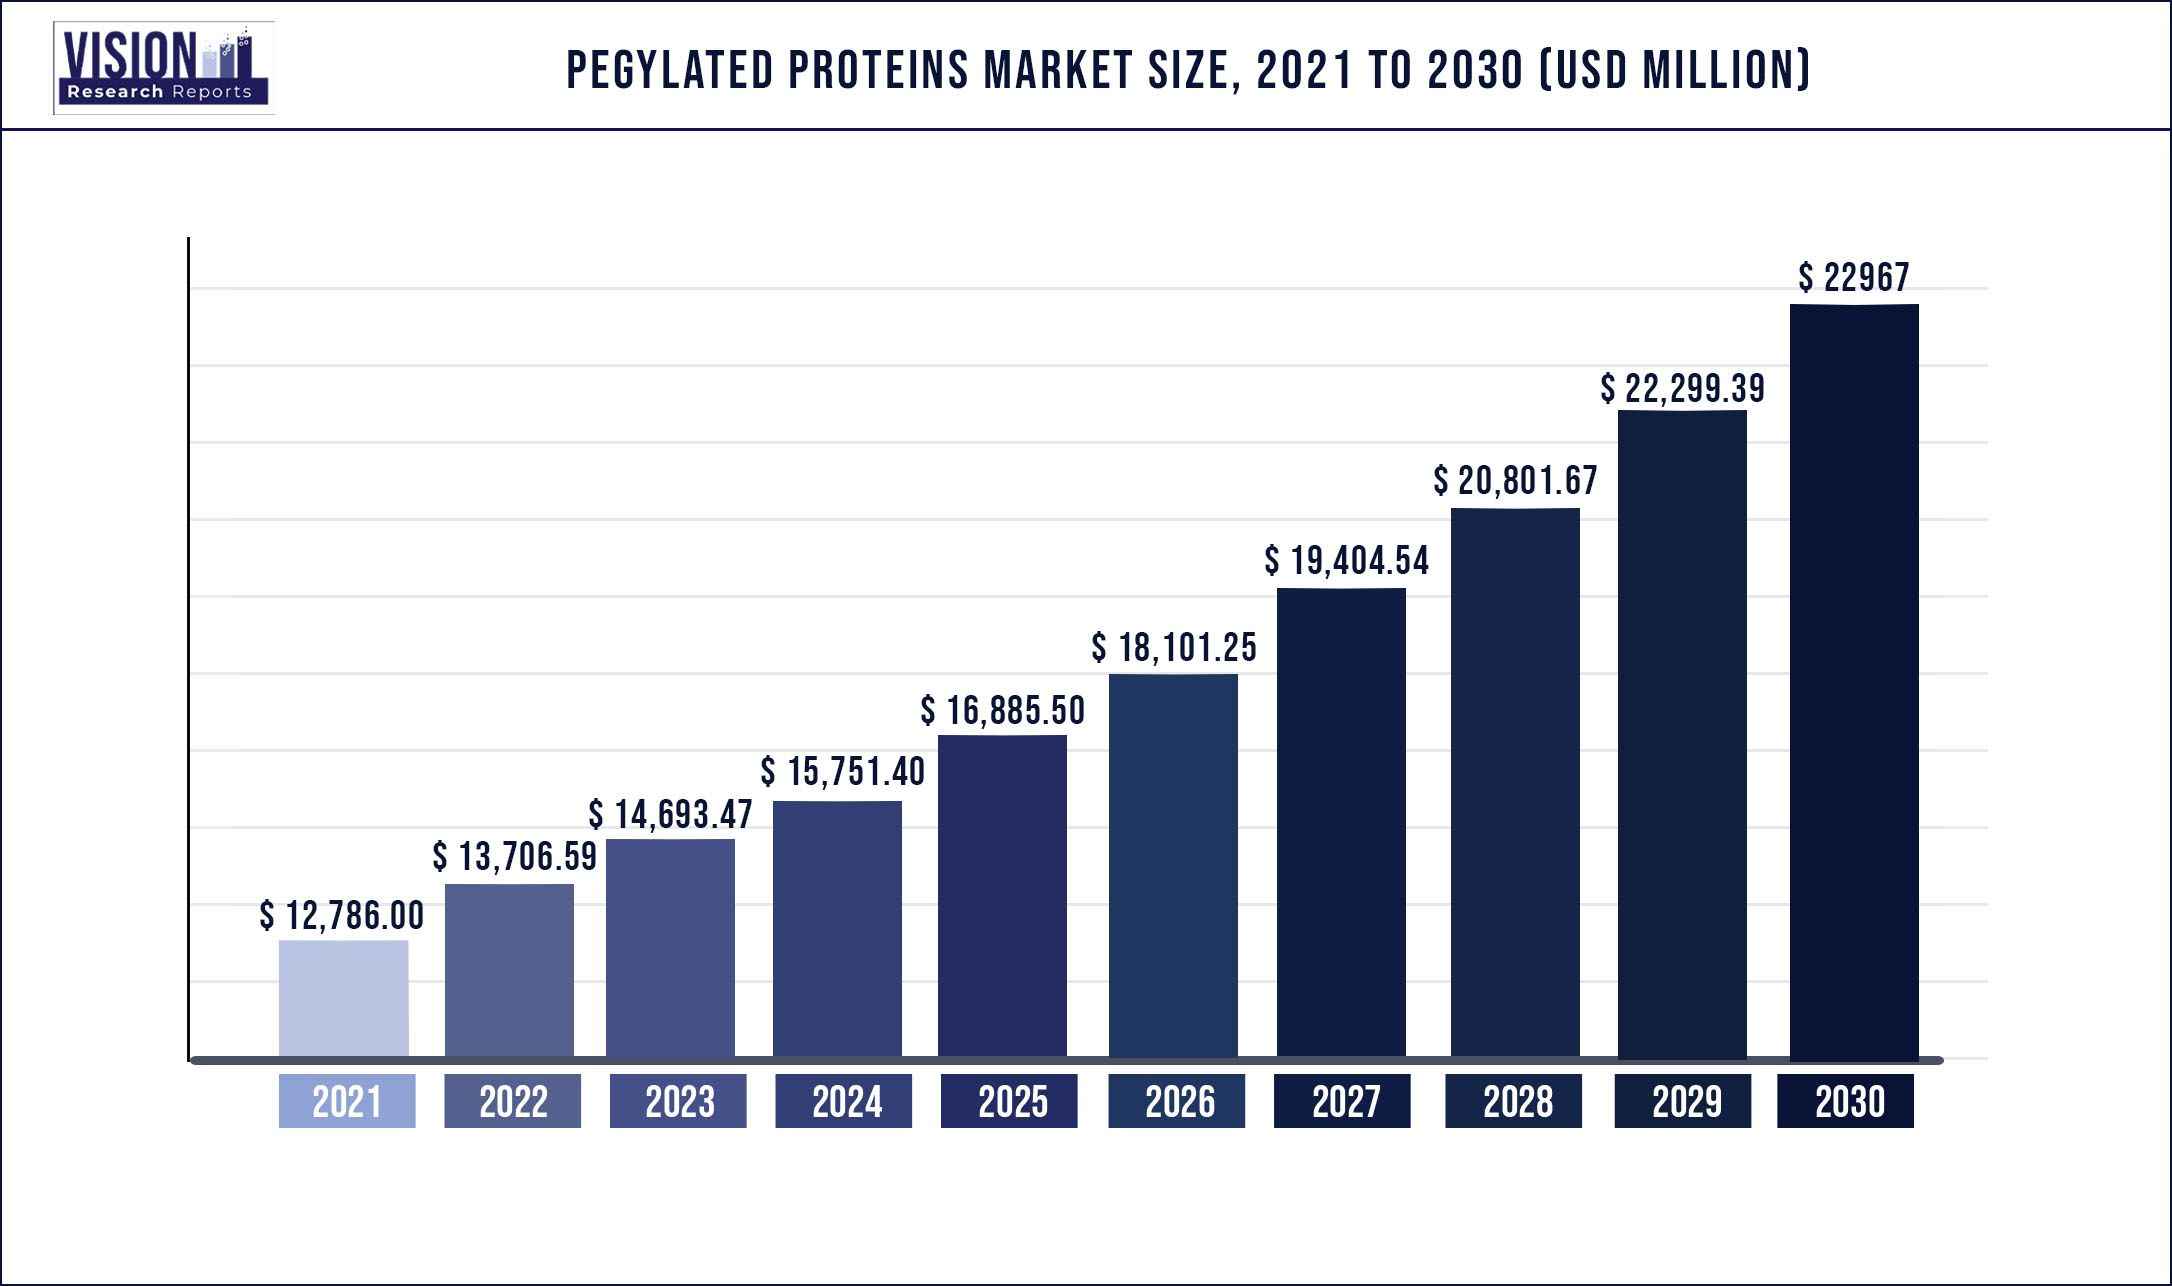 PEGylated Proteins Market Size 2021 to 2030